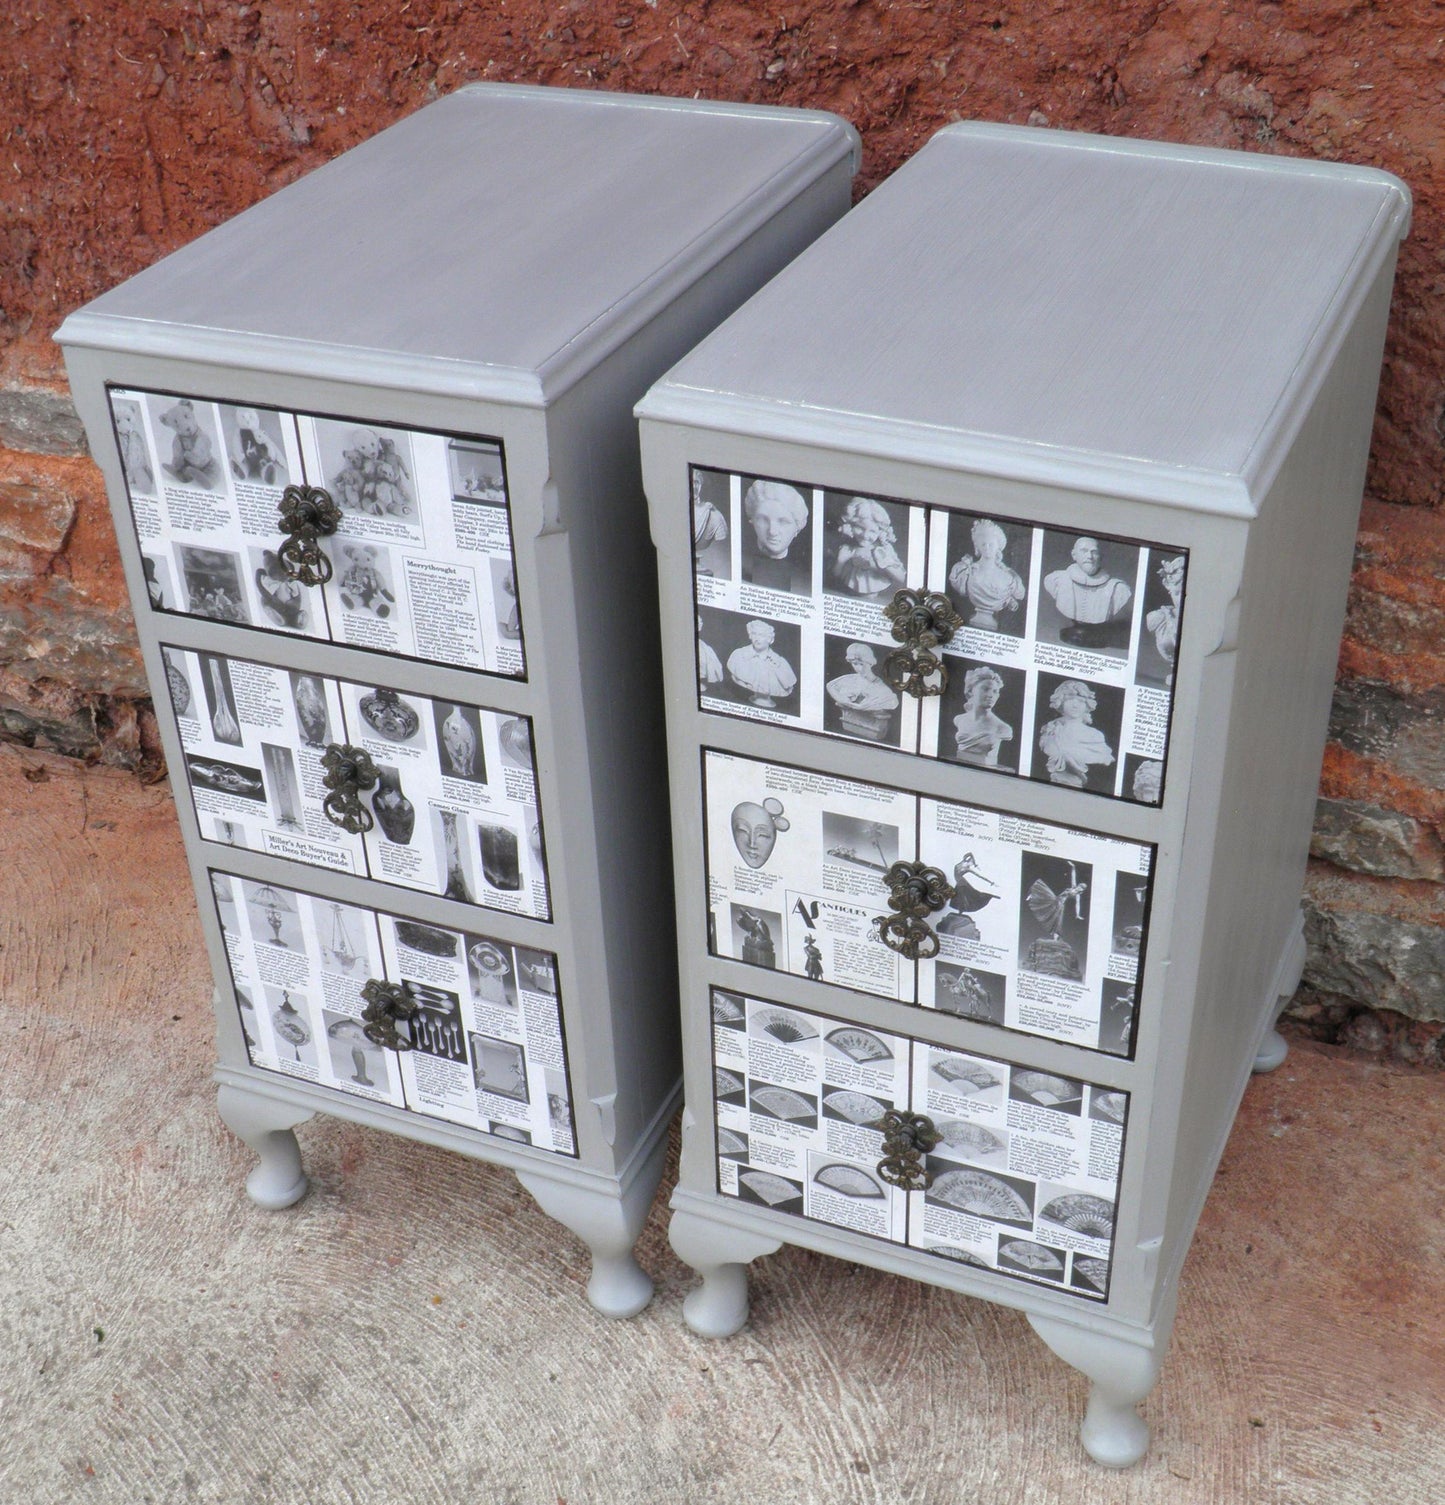 A Pair Of Vintage Upcycled Bedside Chests / Bedside Cabinets